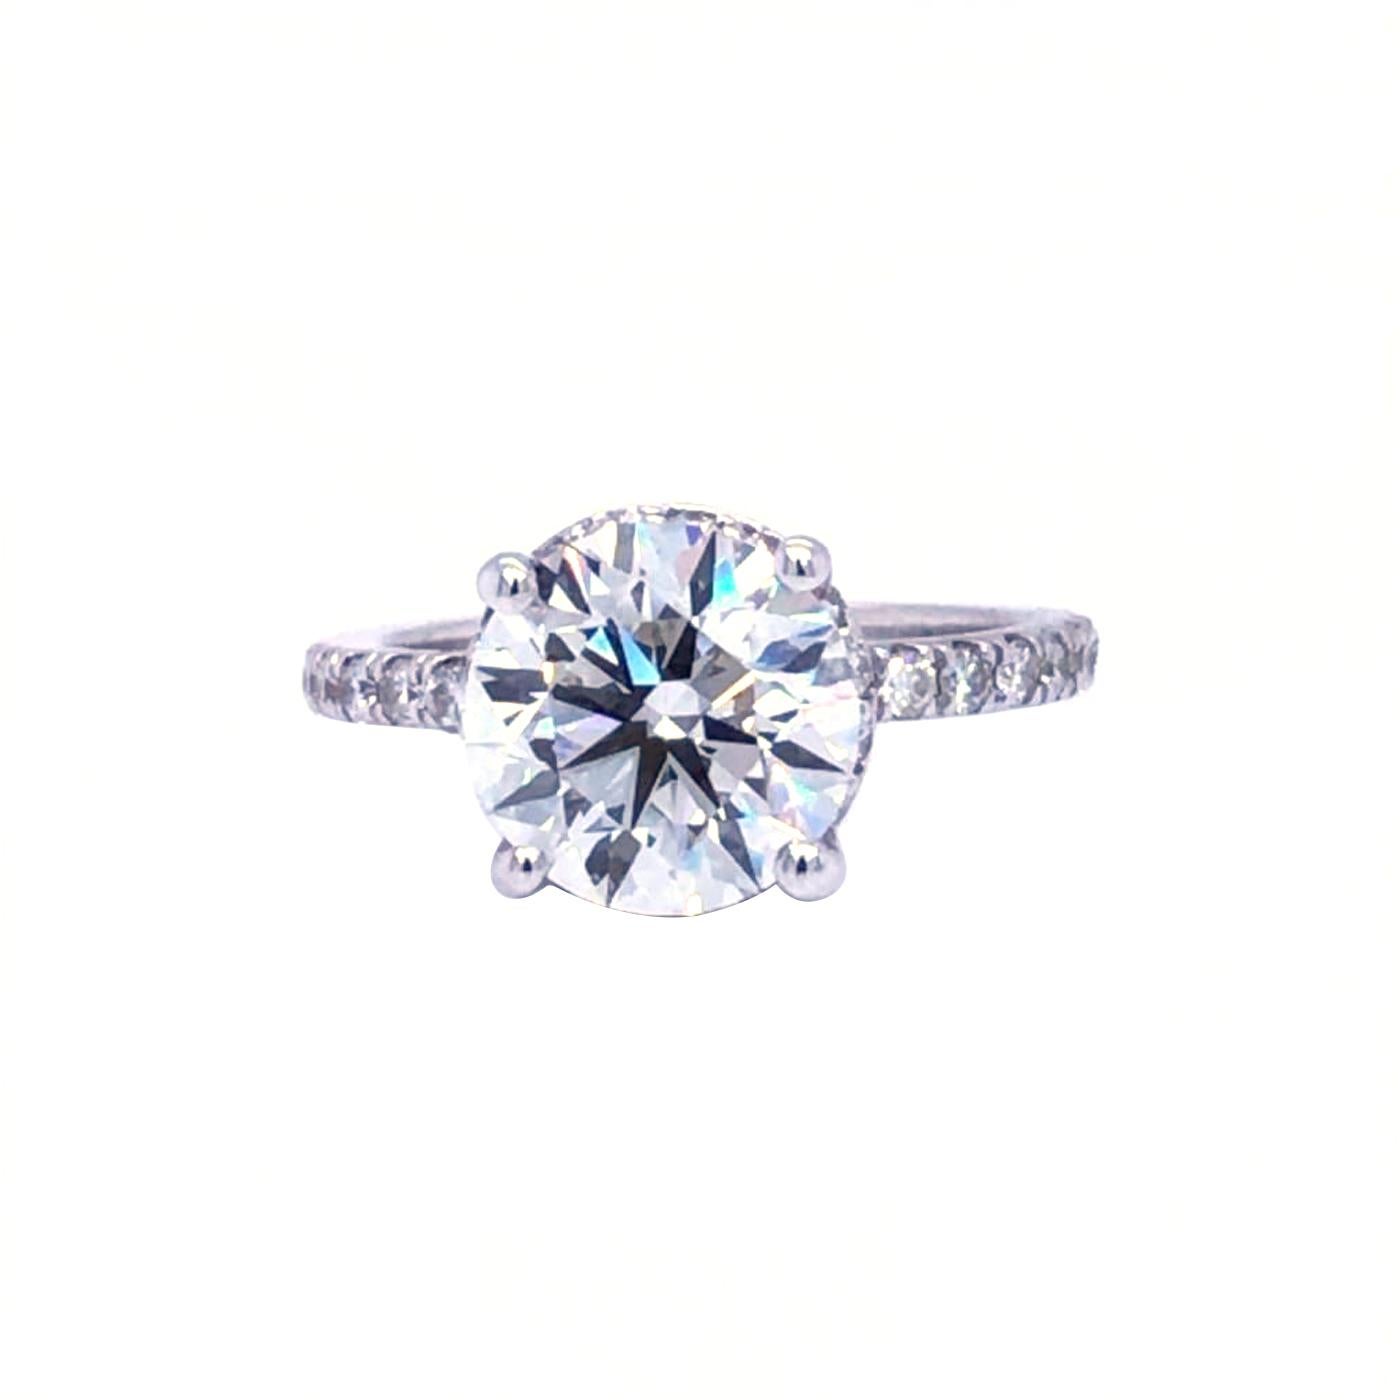 Timeless and elegant, The round brilliant cut diamond is framed with a Round shaped diamond halo, Adding to its appeal, the micro pave diamond halo and shank draw attention and add sparkle to the center stone. This outstanding engagement ring is